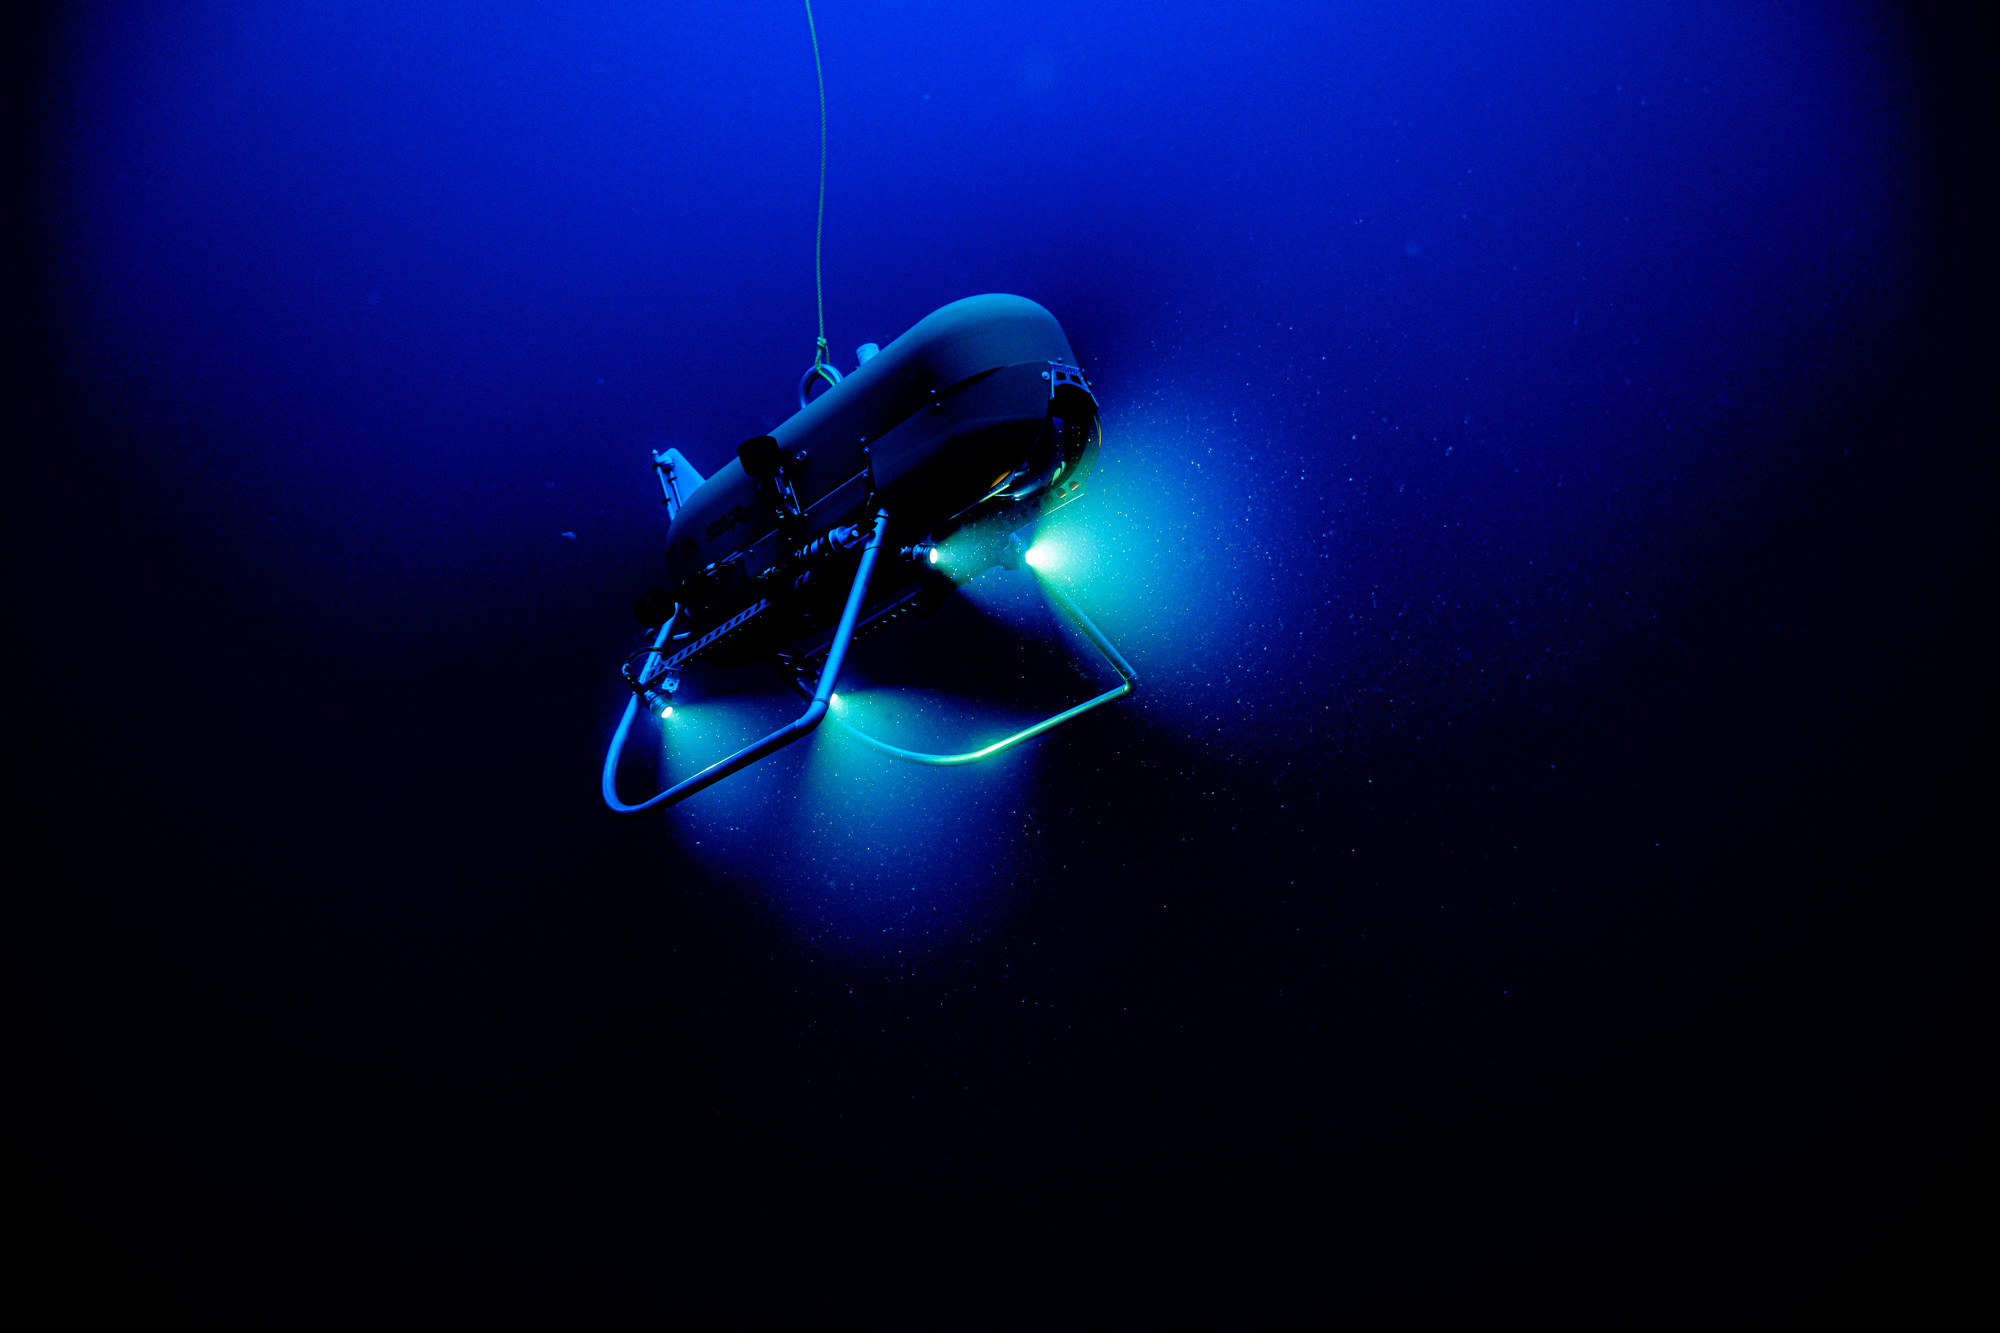 The Orpheus robots will venture into the hadal zone of the ocean: from 20,000 to 36,000 feet beneath the surface.